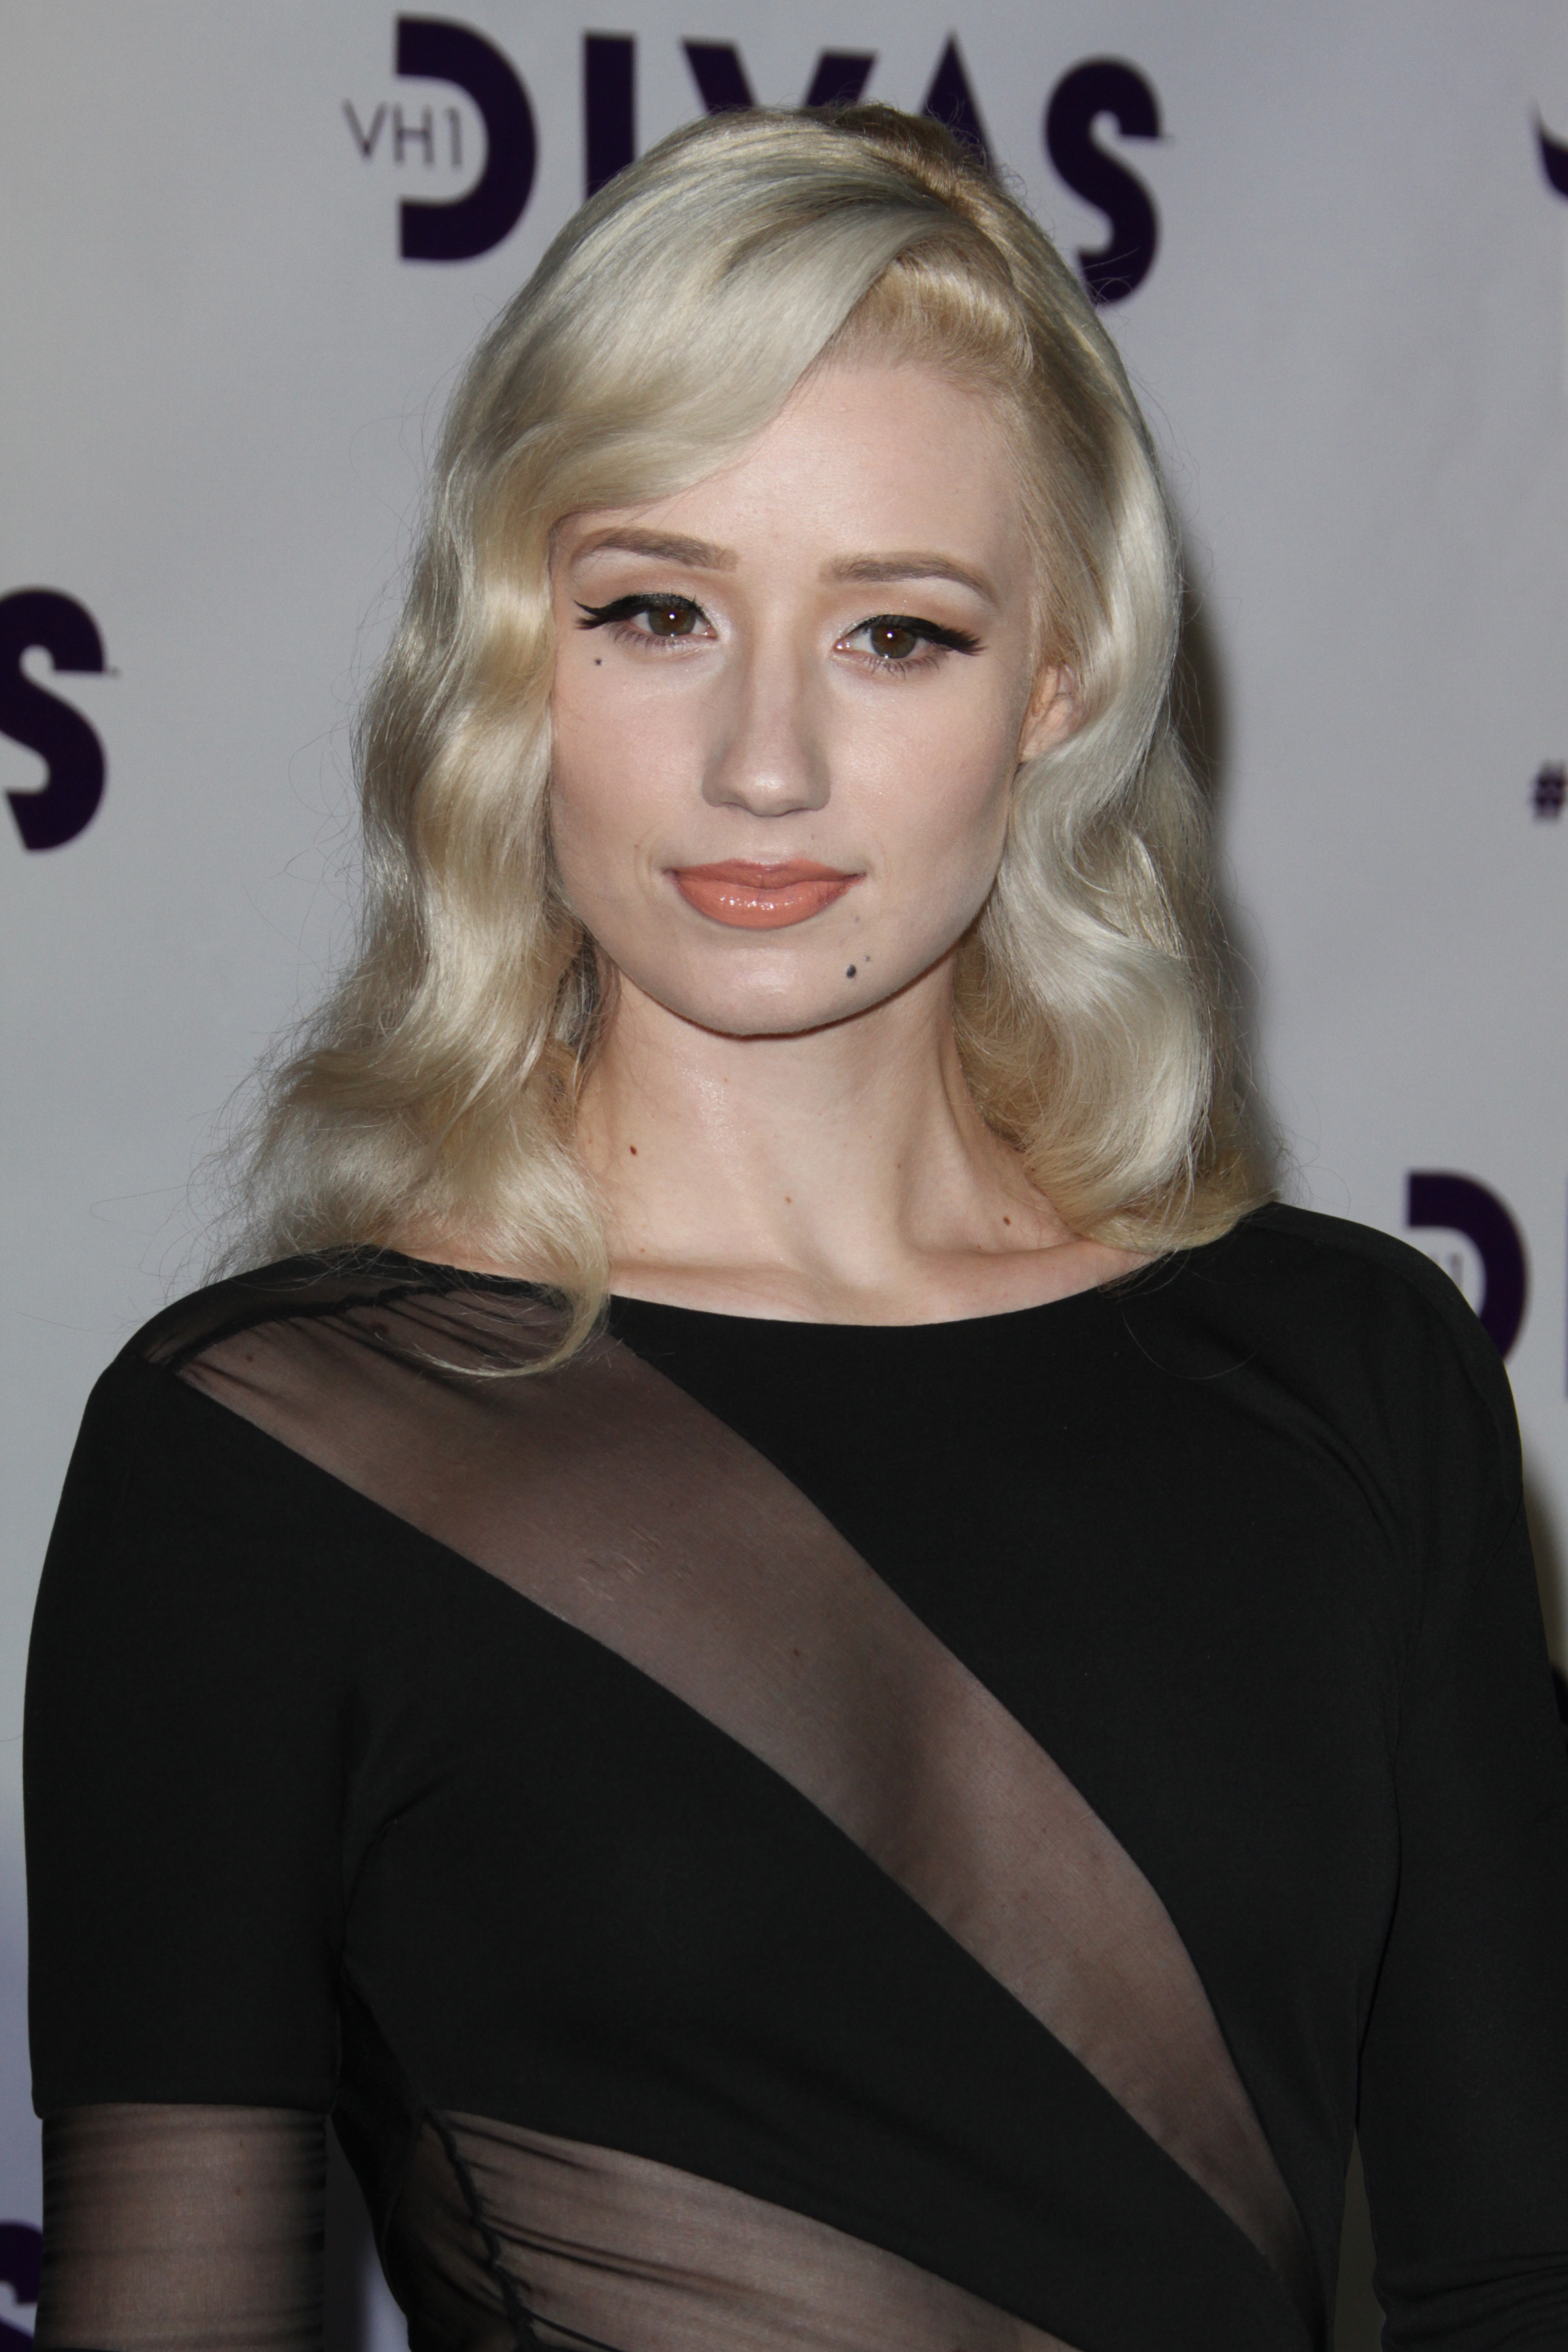 <p>In March 2015, <a href="https://www.wonderwall.com/celebrity/profiles/overview/iggy-azalea-1565.article">Iggy Azalea</a> (pictured in 2012) admitted that she'd gotten her breasts augmented. "I'd thought about it my entire life," she told Vogue. "I decided I wasn't into secret-keeping." She added to E! News: "I love them so much I had to talk about them!" But she wasn't finished changing up her look...</p>